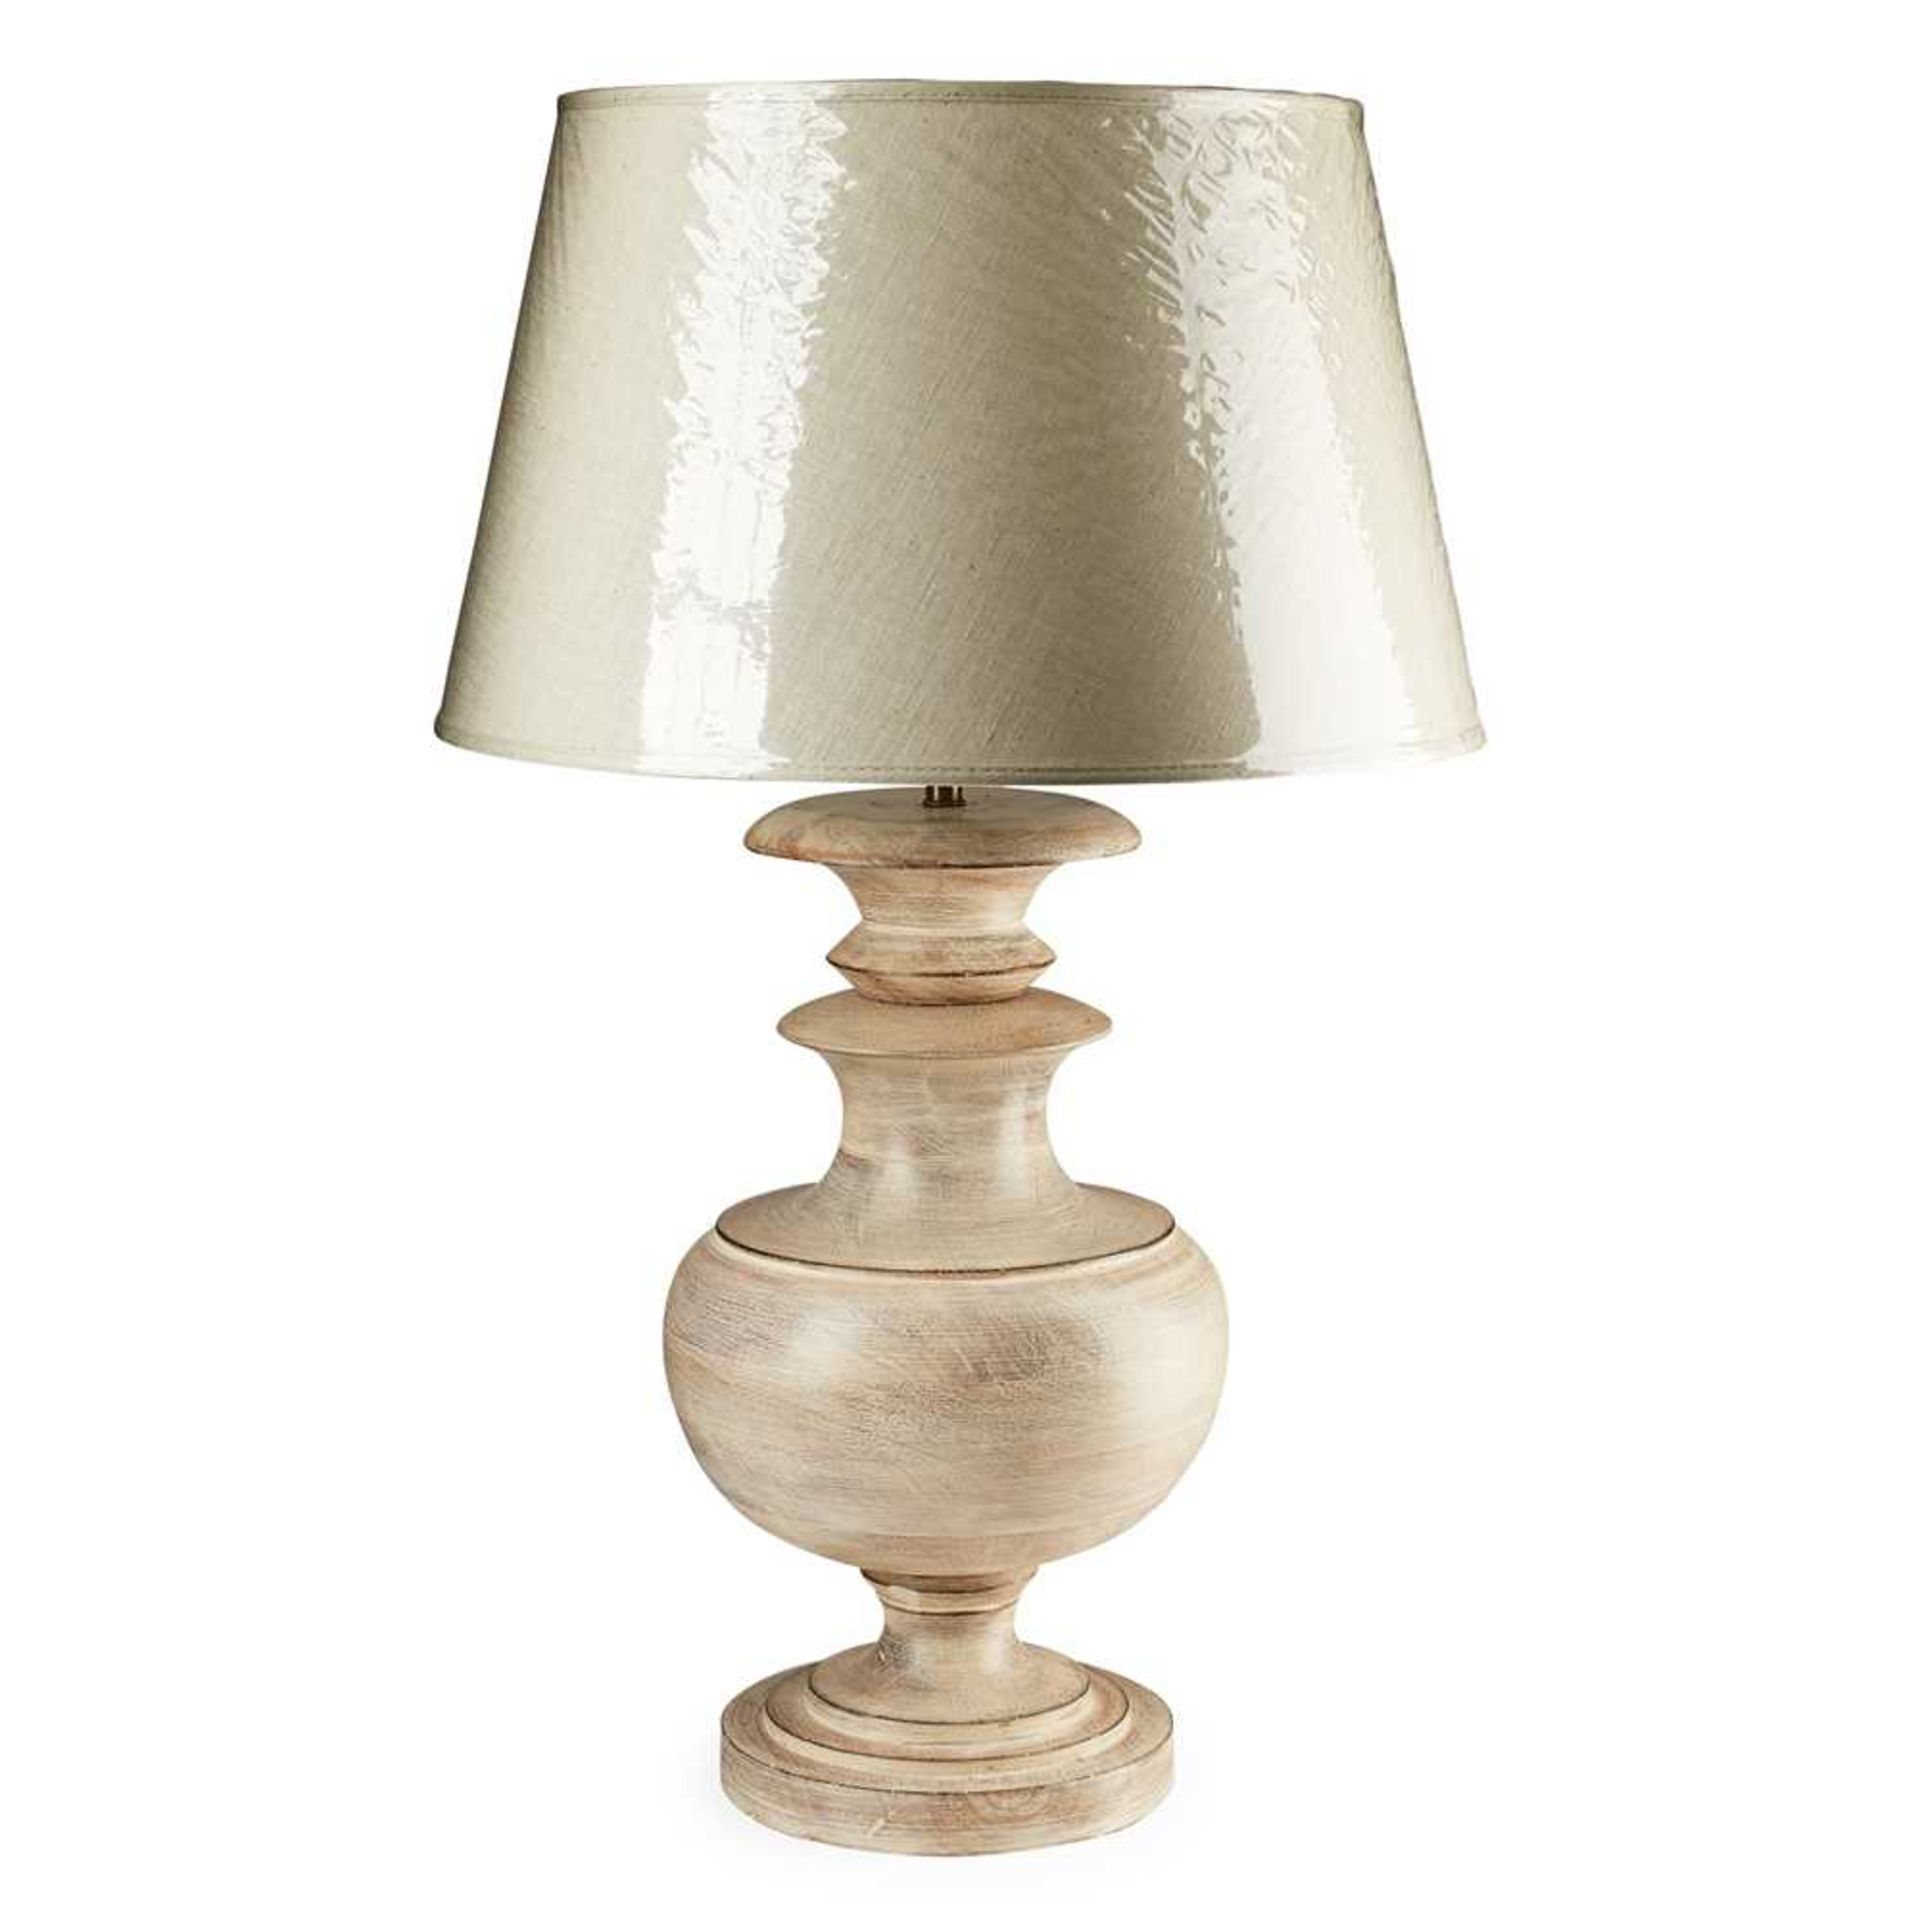 PAIR OF PAINTED WOOD BALUSTER LAMPS MODERN - Image 2 of 4